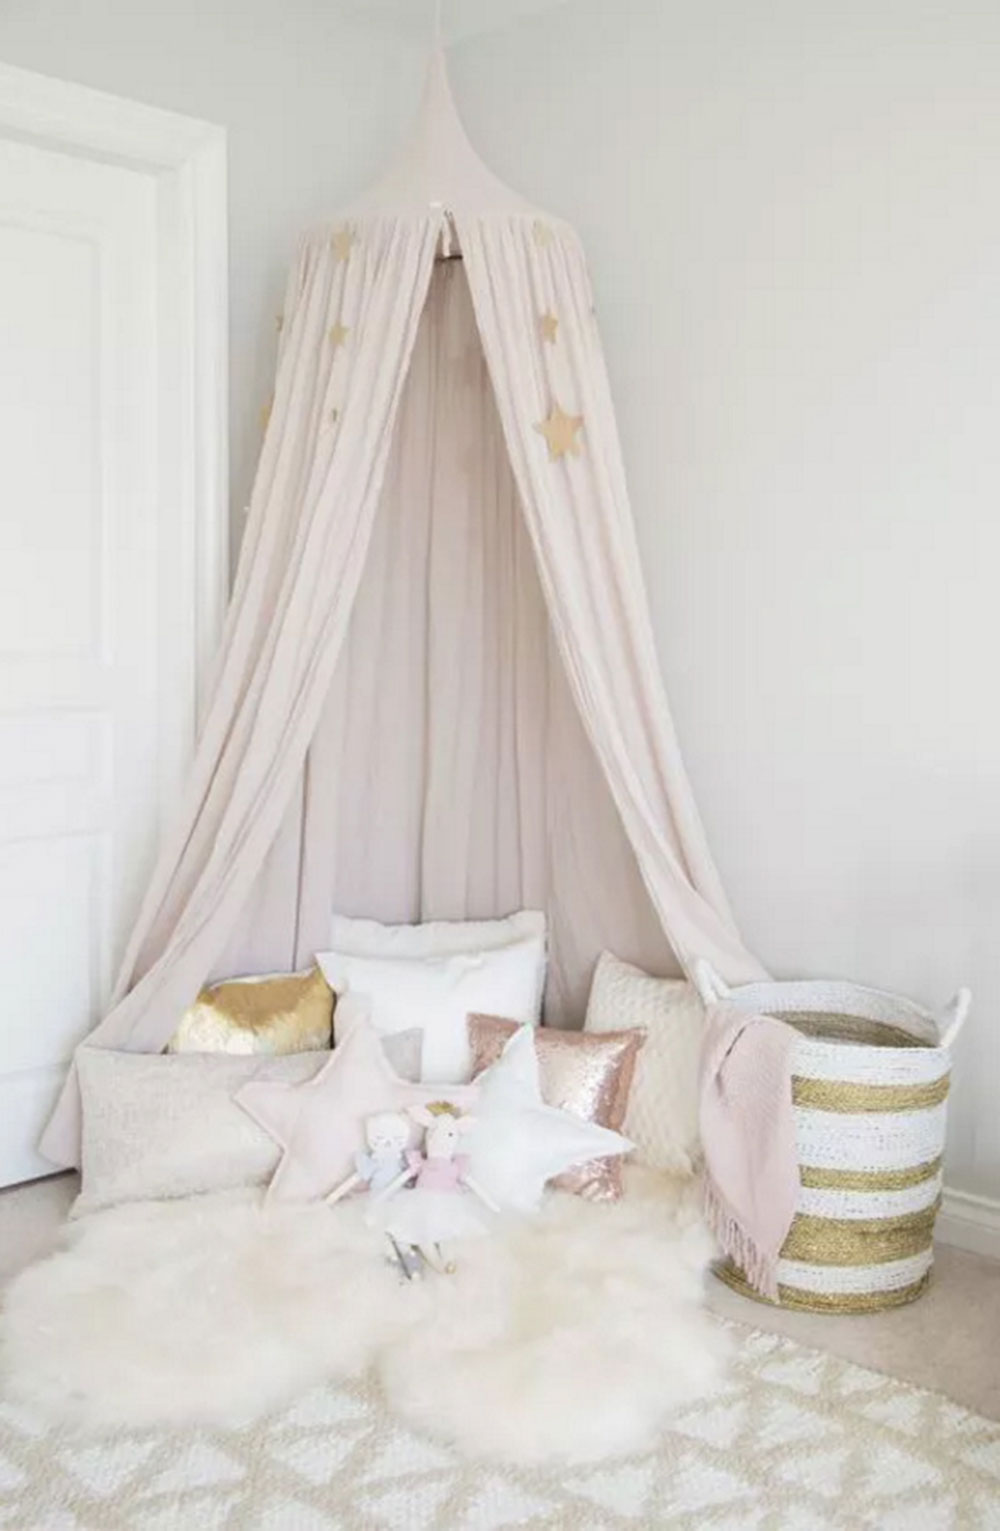 Cozy-Reading Cute rooms ideas that your daughter will love